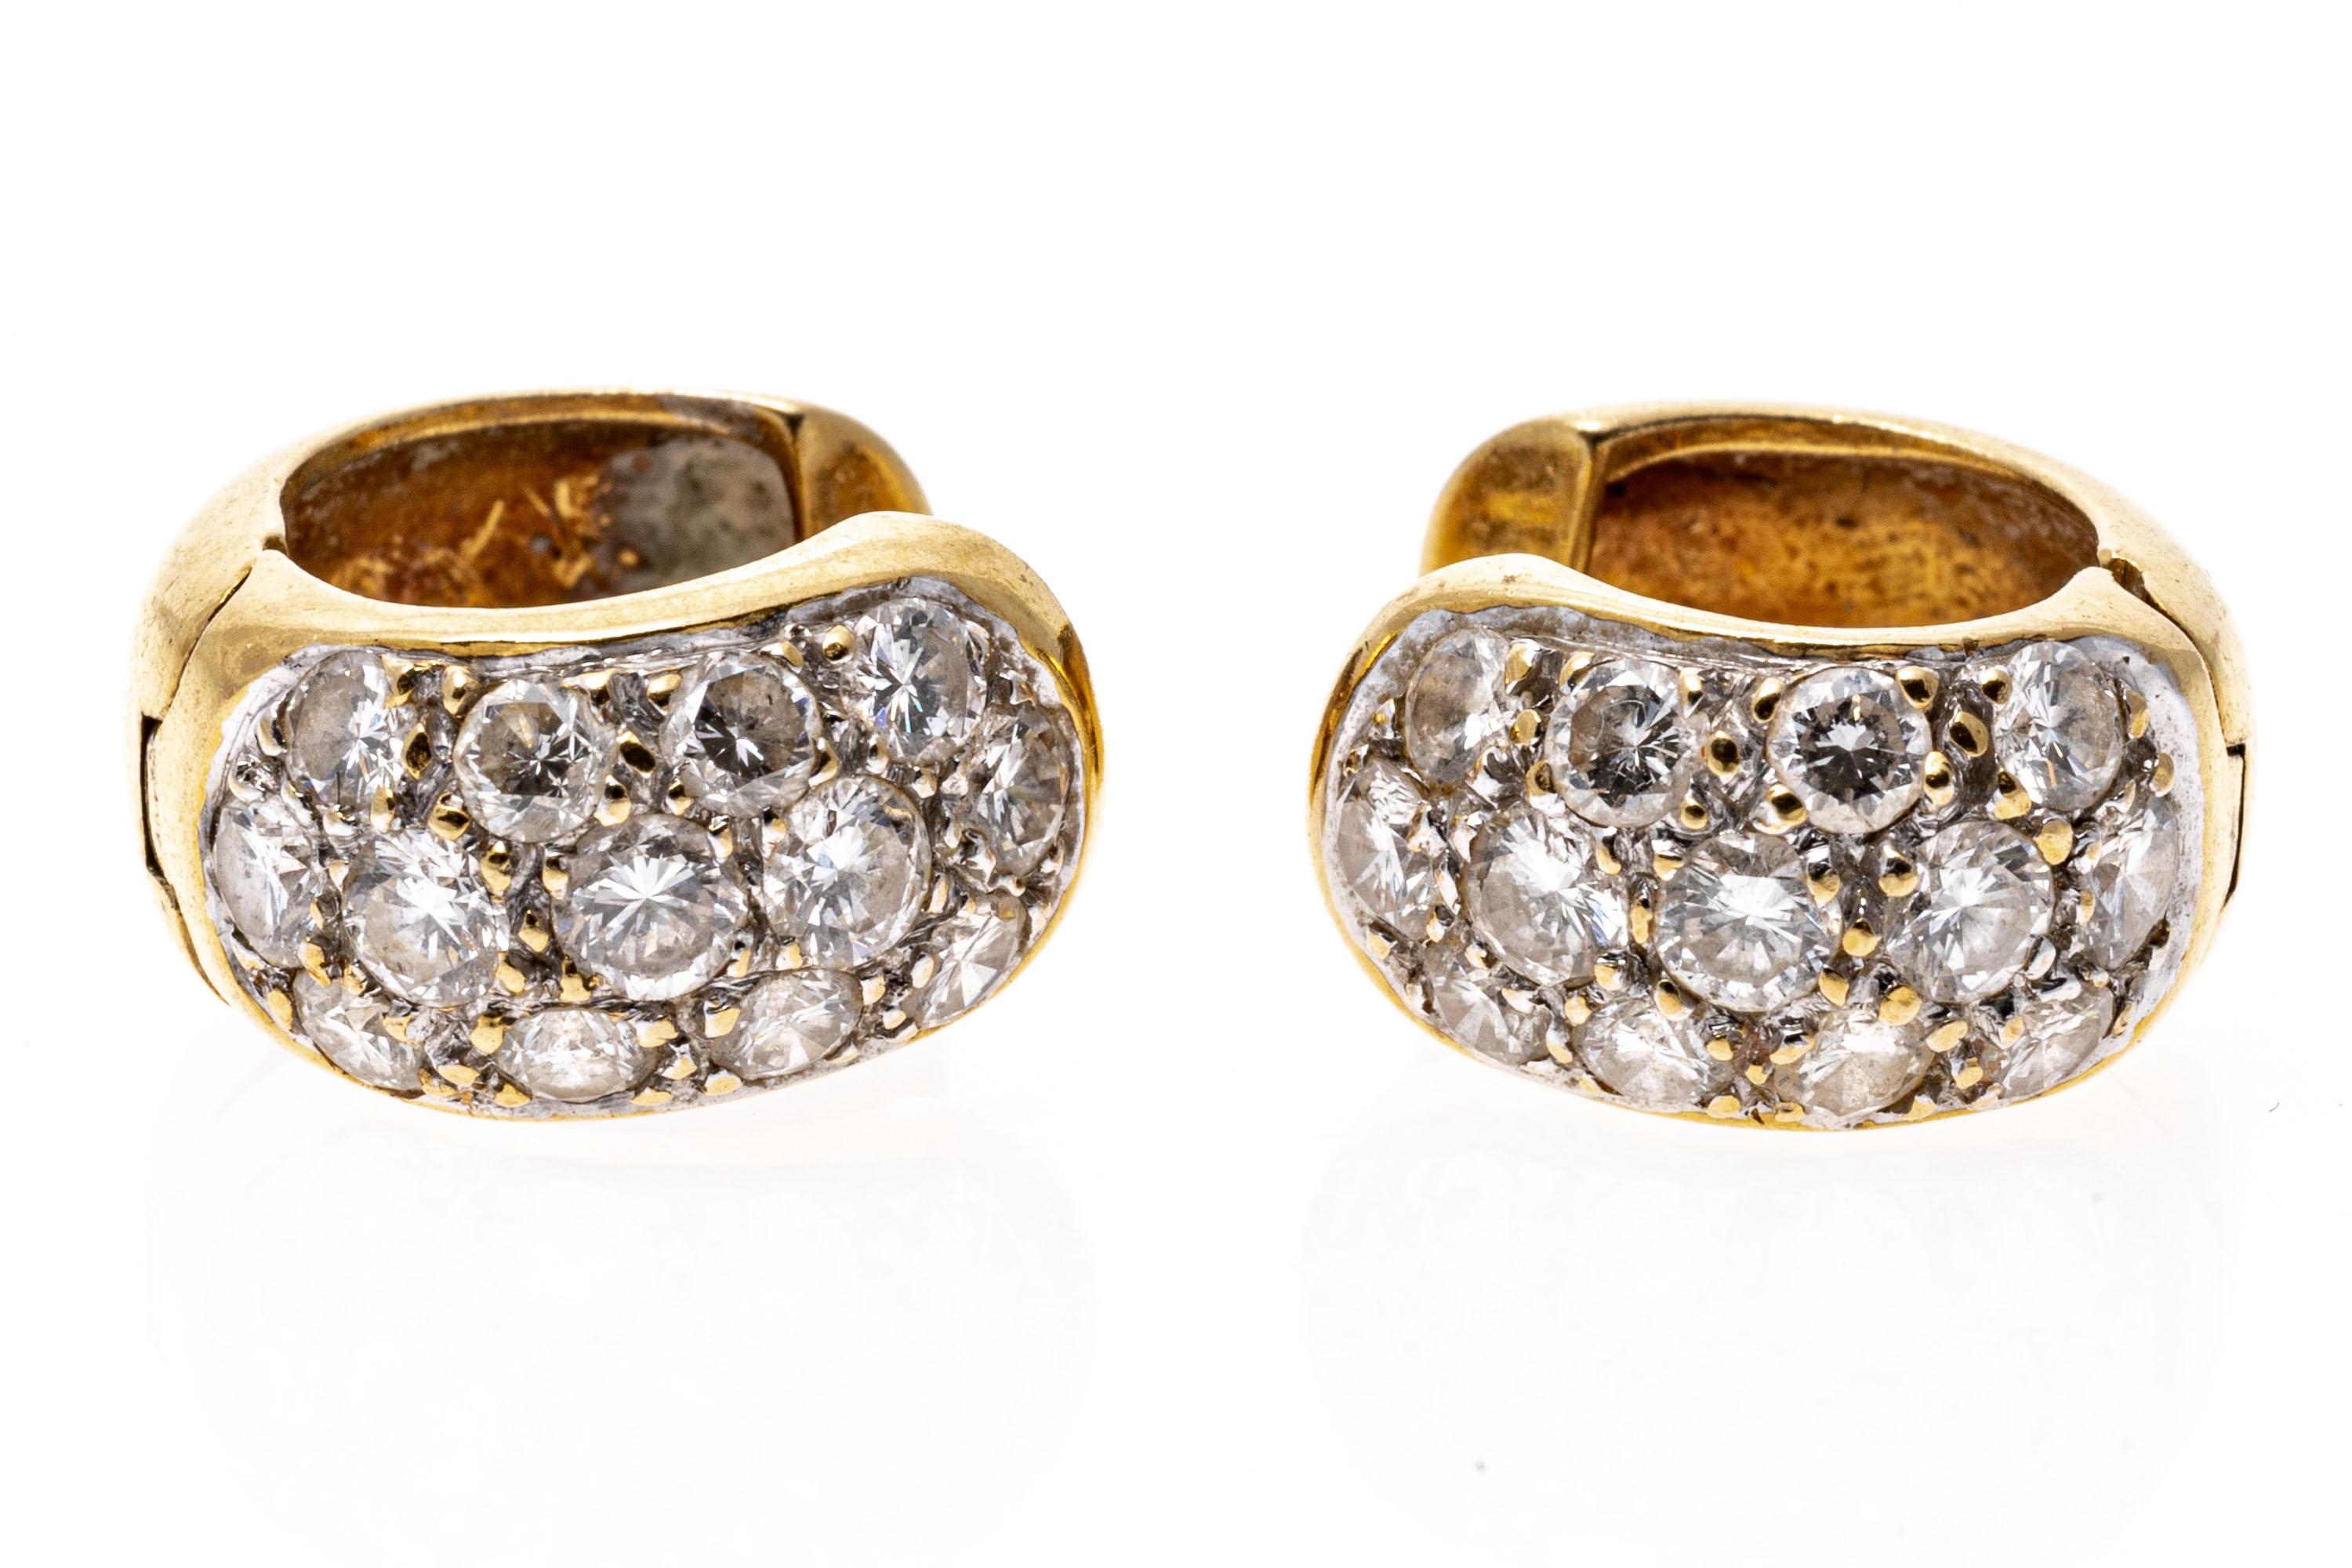 18k yellow gold earrings. These stylish earrings are a huggie style, with a top of pave set, round faceted diamonds, approximately 1.08 TCW. The earrings also have posts, with hinged style backs.
Marks: 750
Dimensions: 7/16